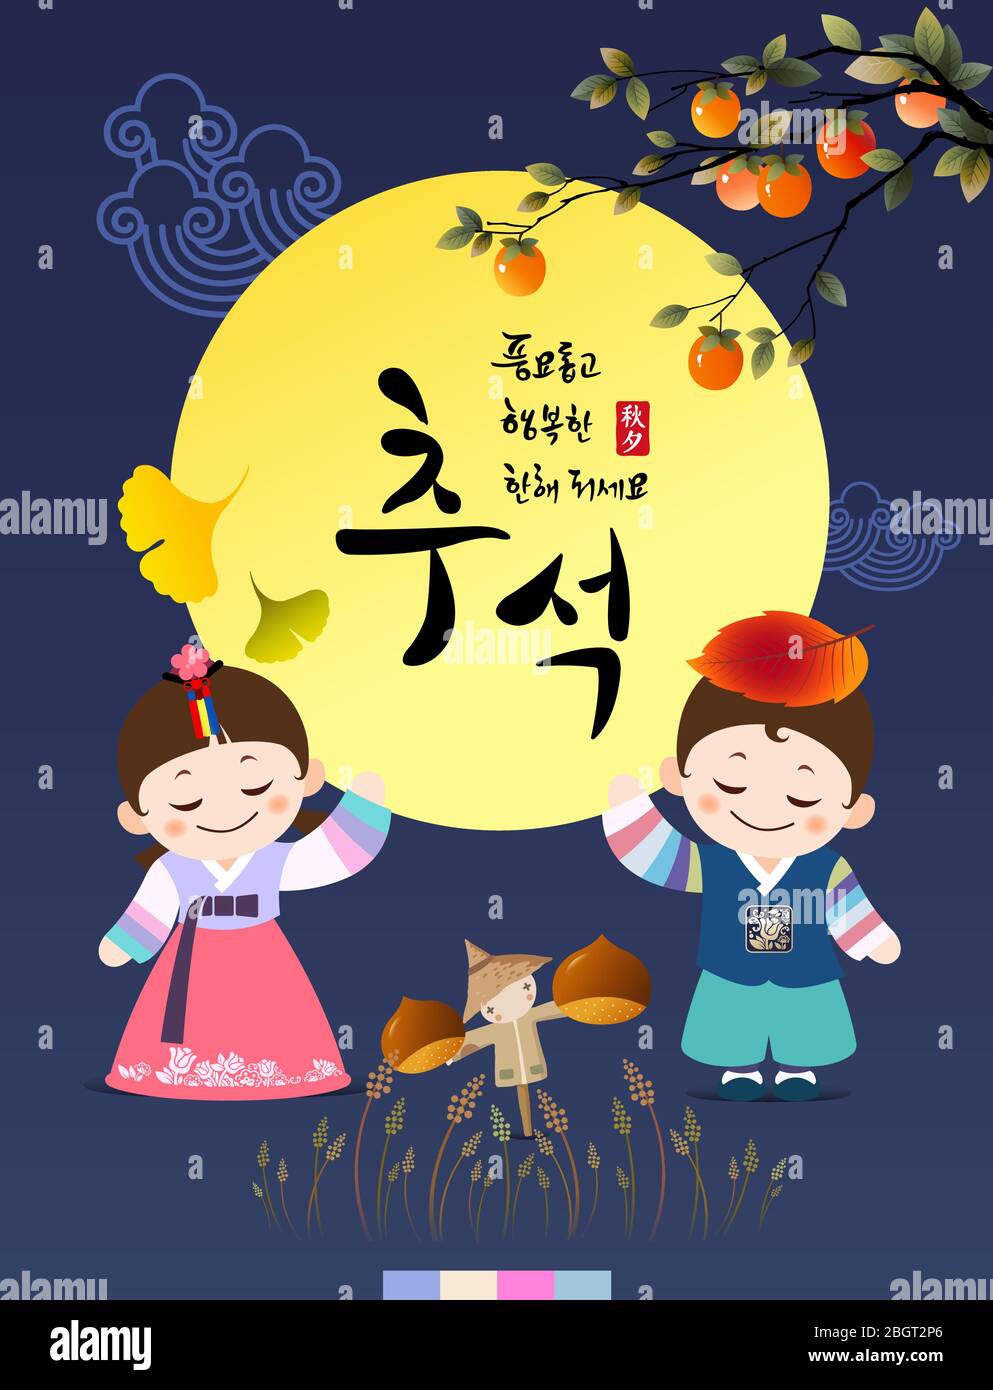 Rich harvest and happy Chuseok, Hangawi, Korean translation. Korean traditional Childrens Character and full moon. Stock Vector